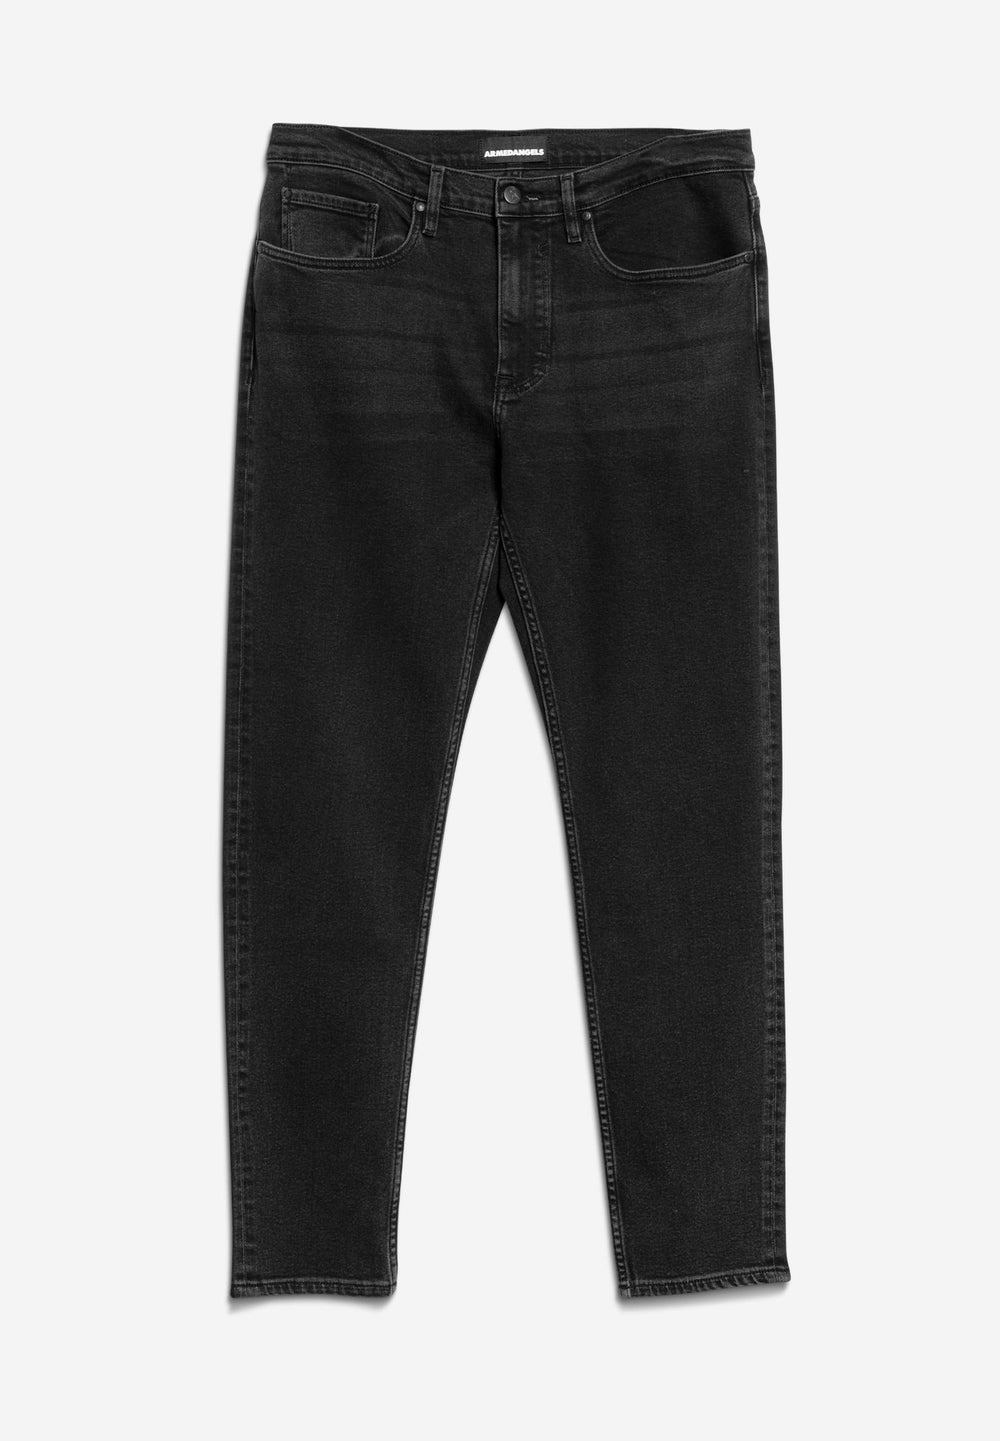 AARJO Black Washed Authentic Regular Fit Jeans